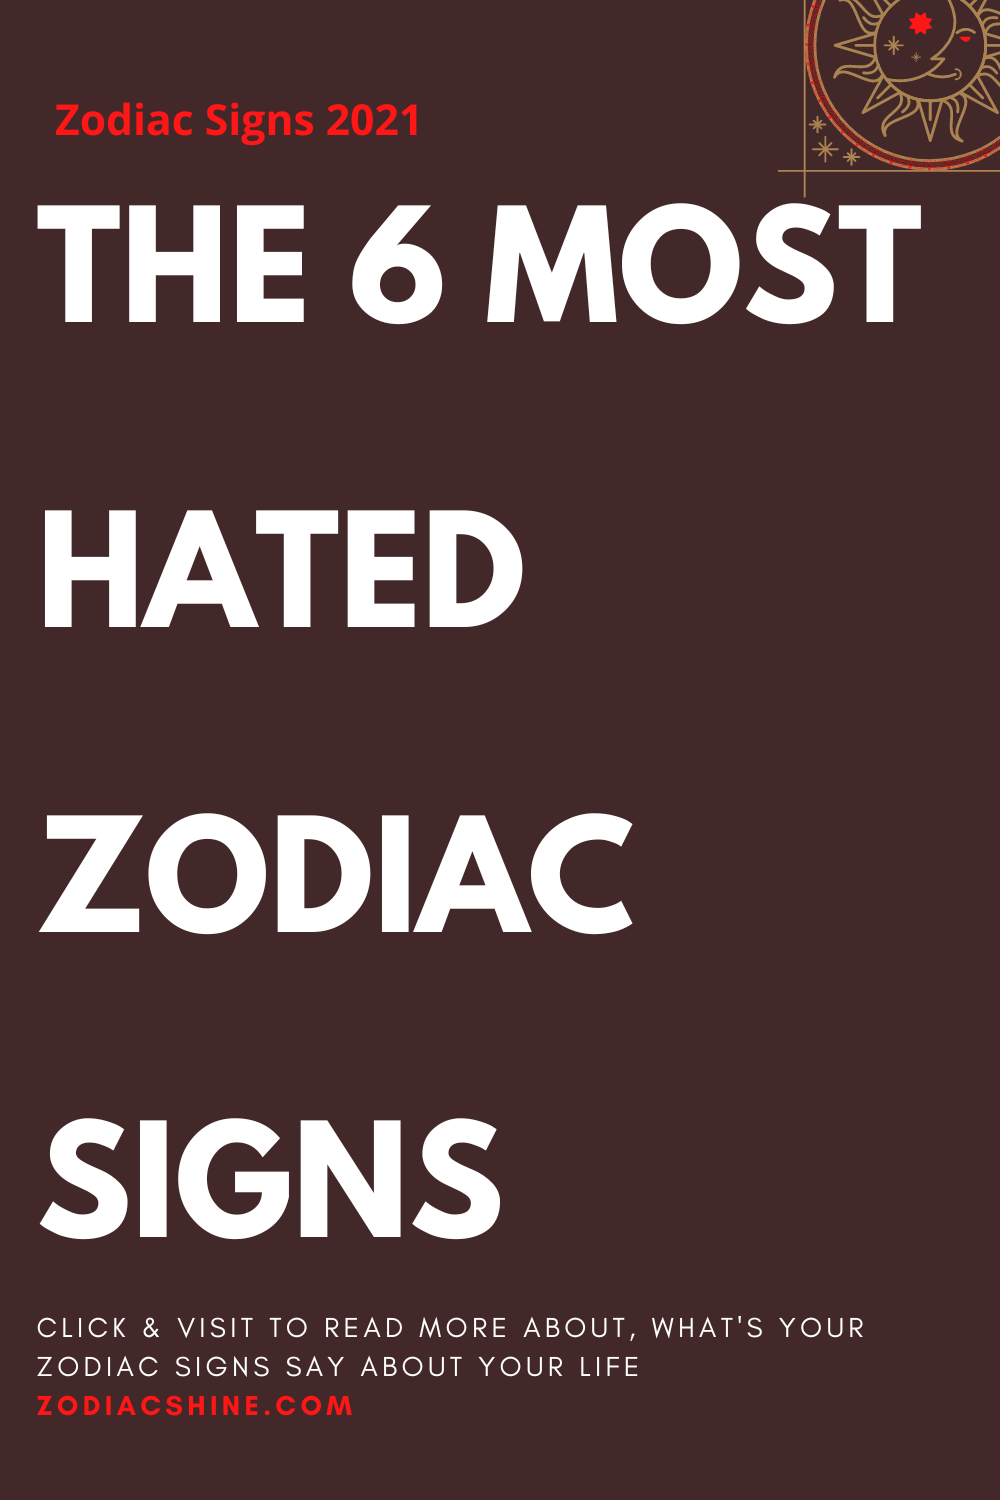 THE 6 MOST HATED ZODIAC SIGNS